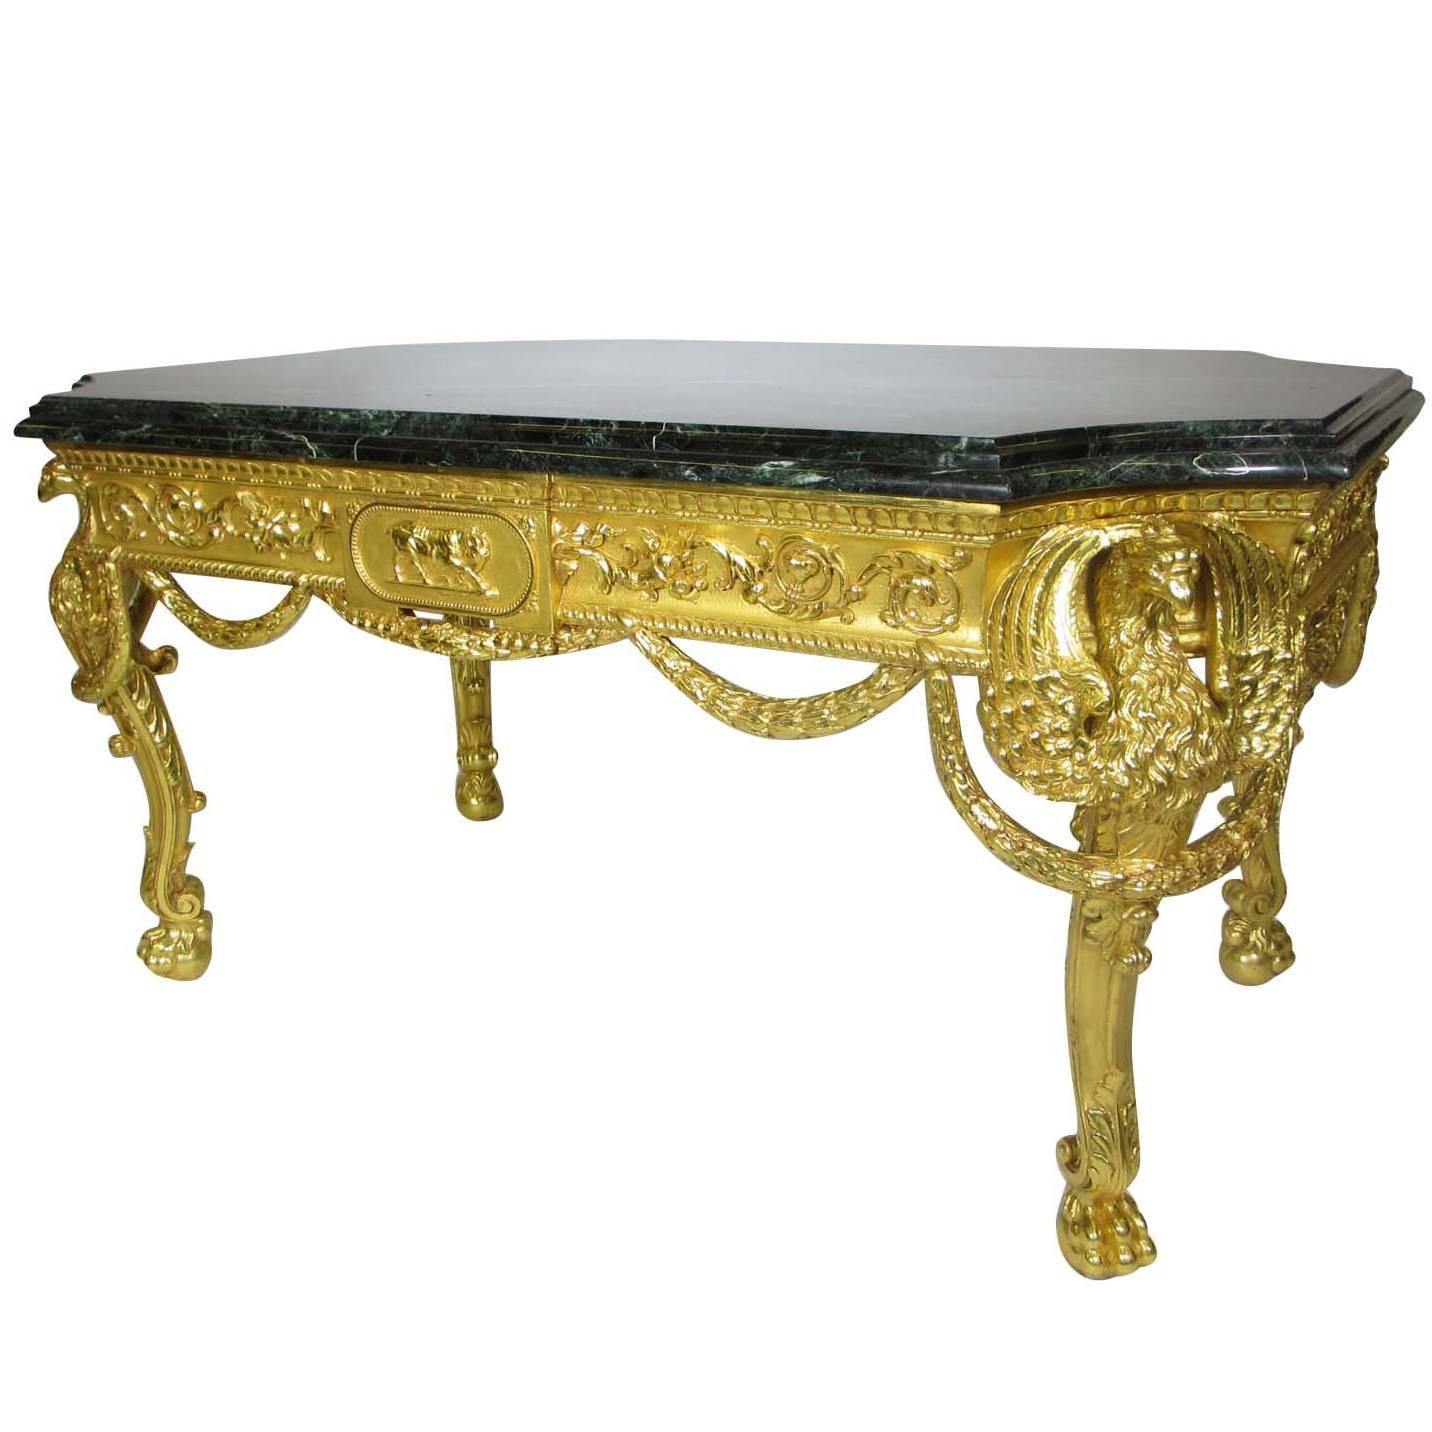 Palatial French 19th Century Empire Style Giltwood Carved Eagles Center Table For Sale